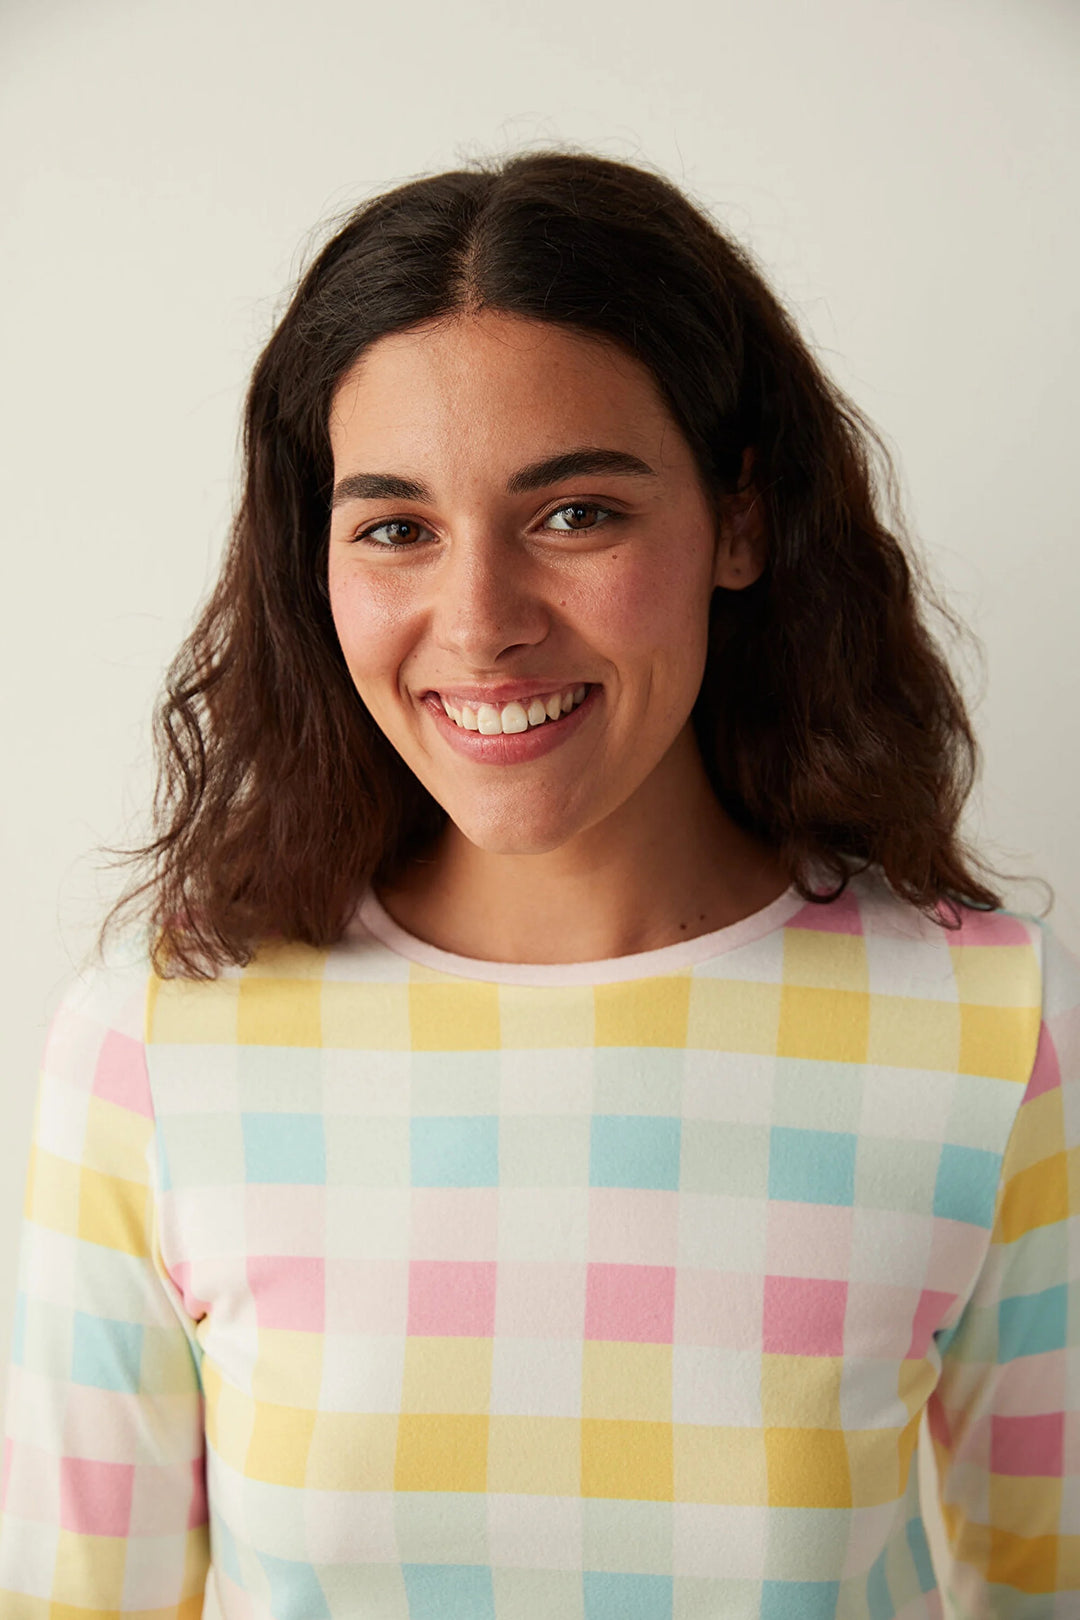 Multi Colour Colored Gingham Thermal Tshirt